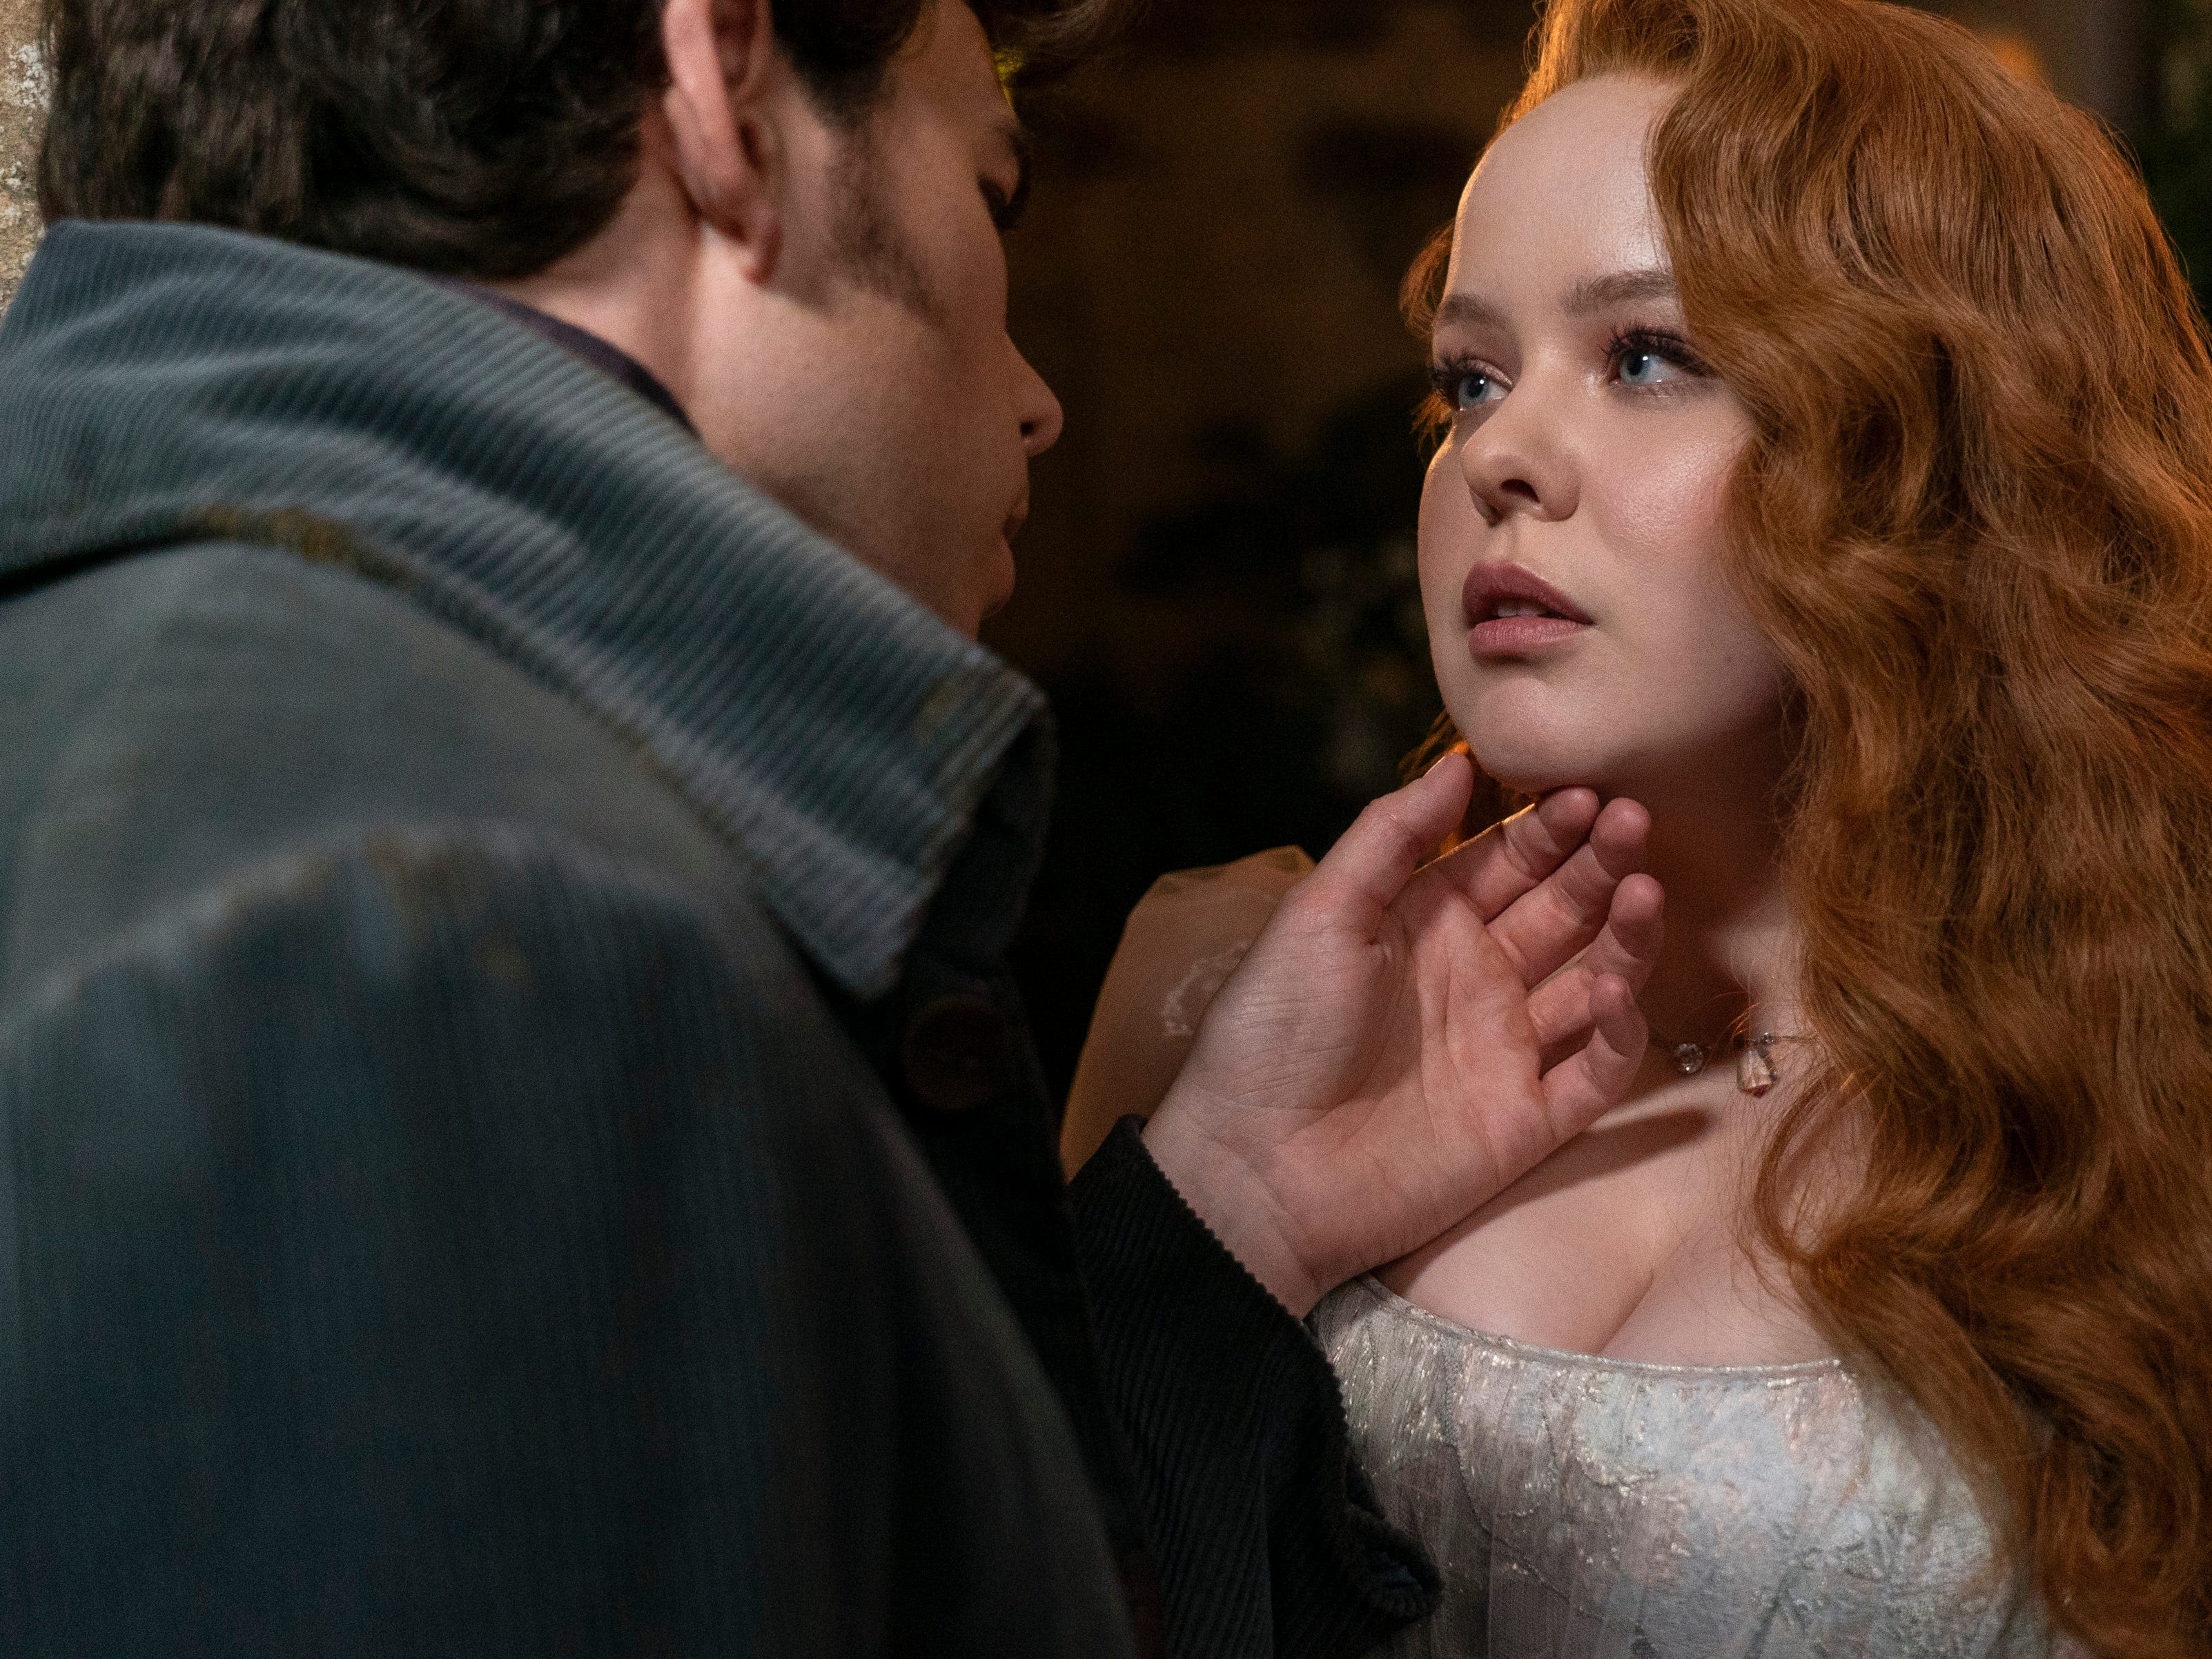 Teases about the 'Bridgerton' season 3 mirror scene have sent fans into a frenzy — here's what actually happens in the book